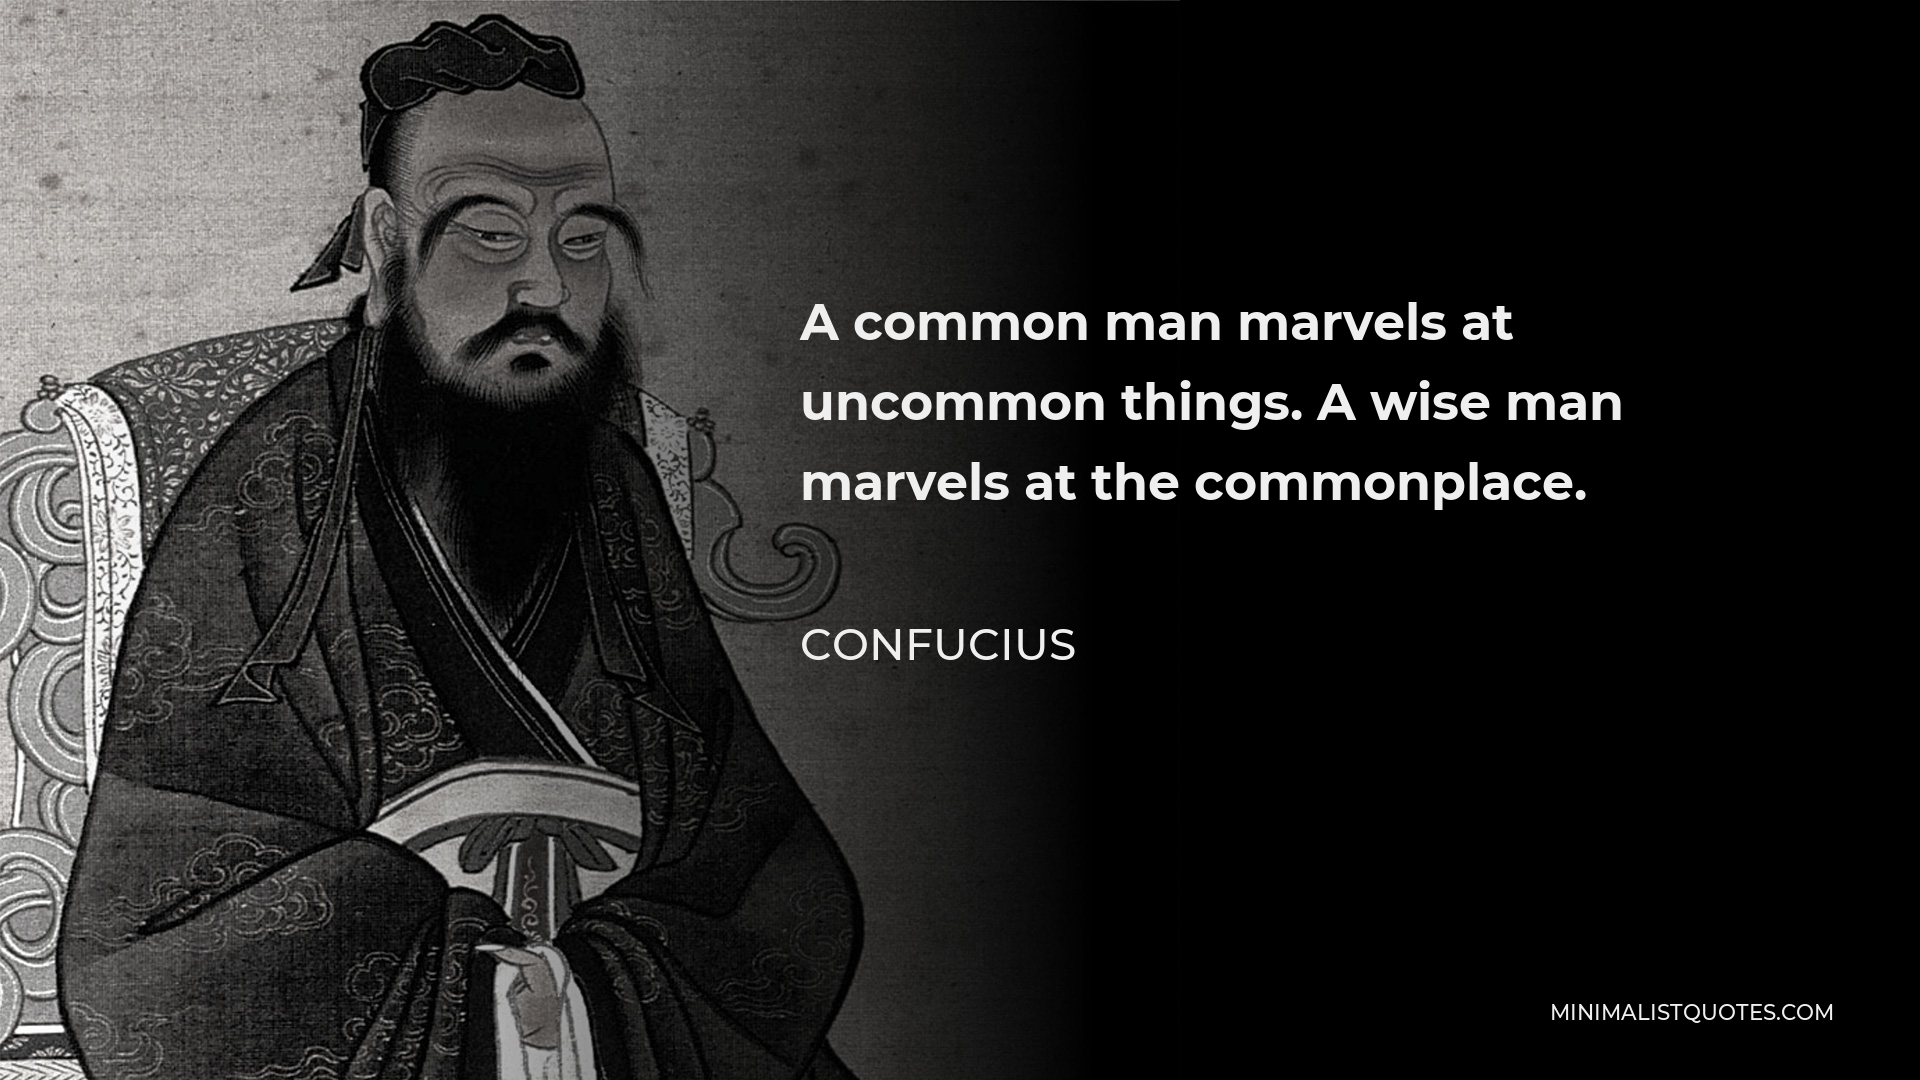 Confucius Quote - A common man marvels at uncommon things. A wise man marvels at the commonplace.